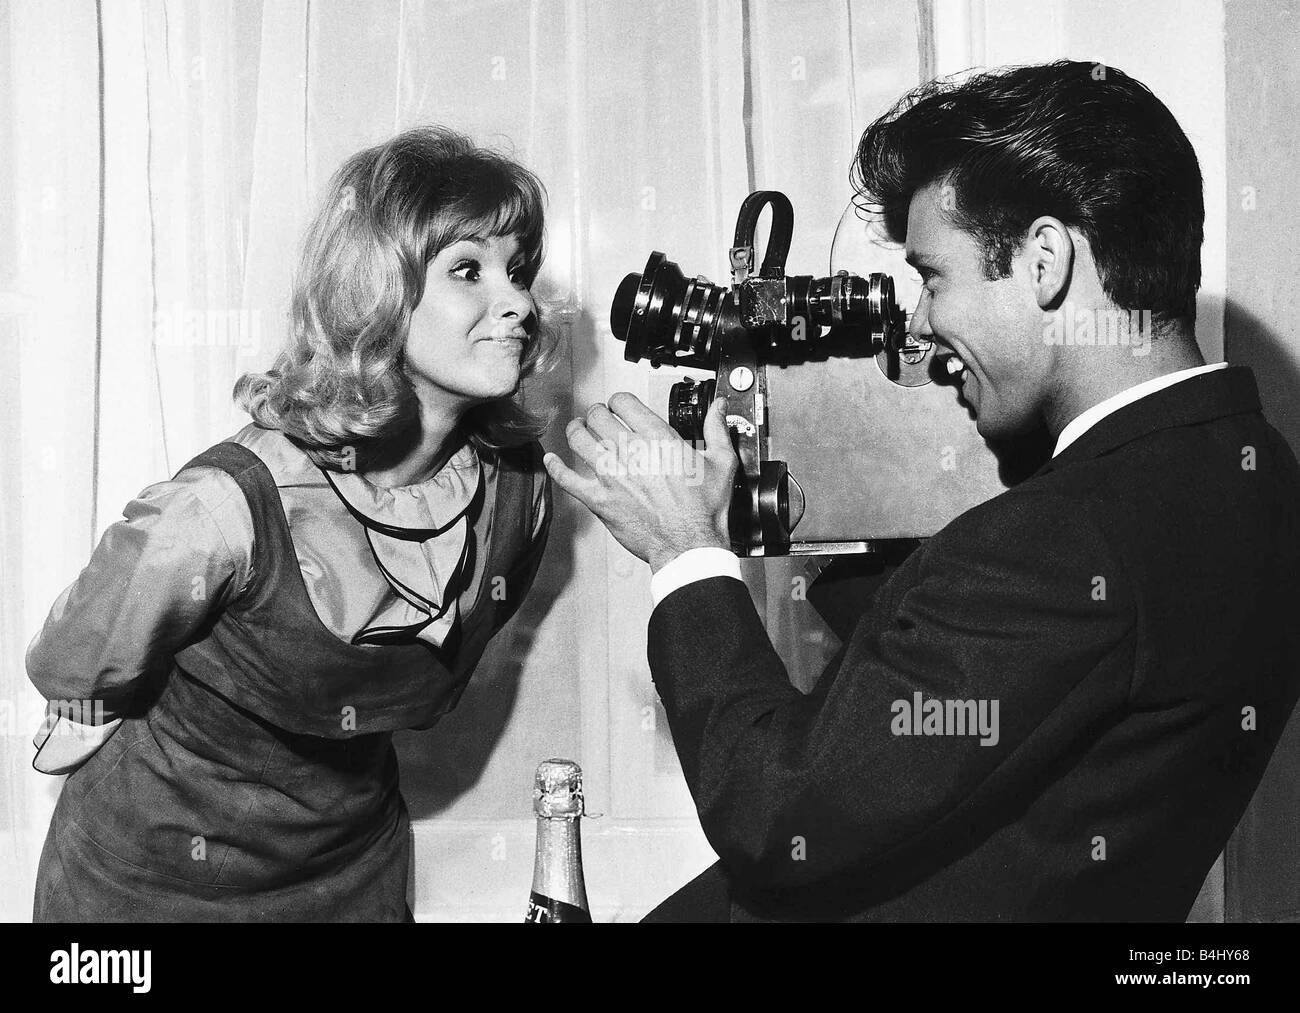 Cliff Richard Singer Actor gets behind the camera to film his co star  pulling a funny face Stock Photo - Alamy